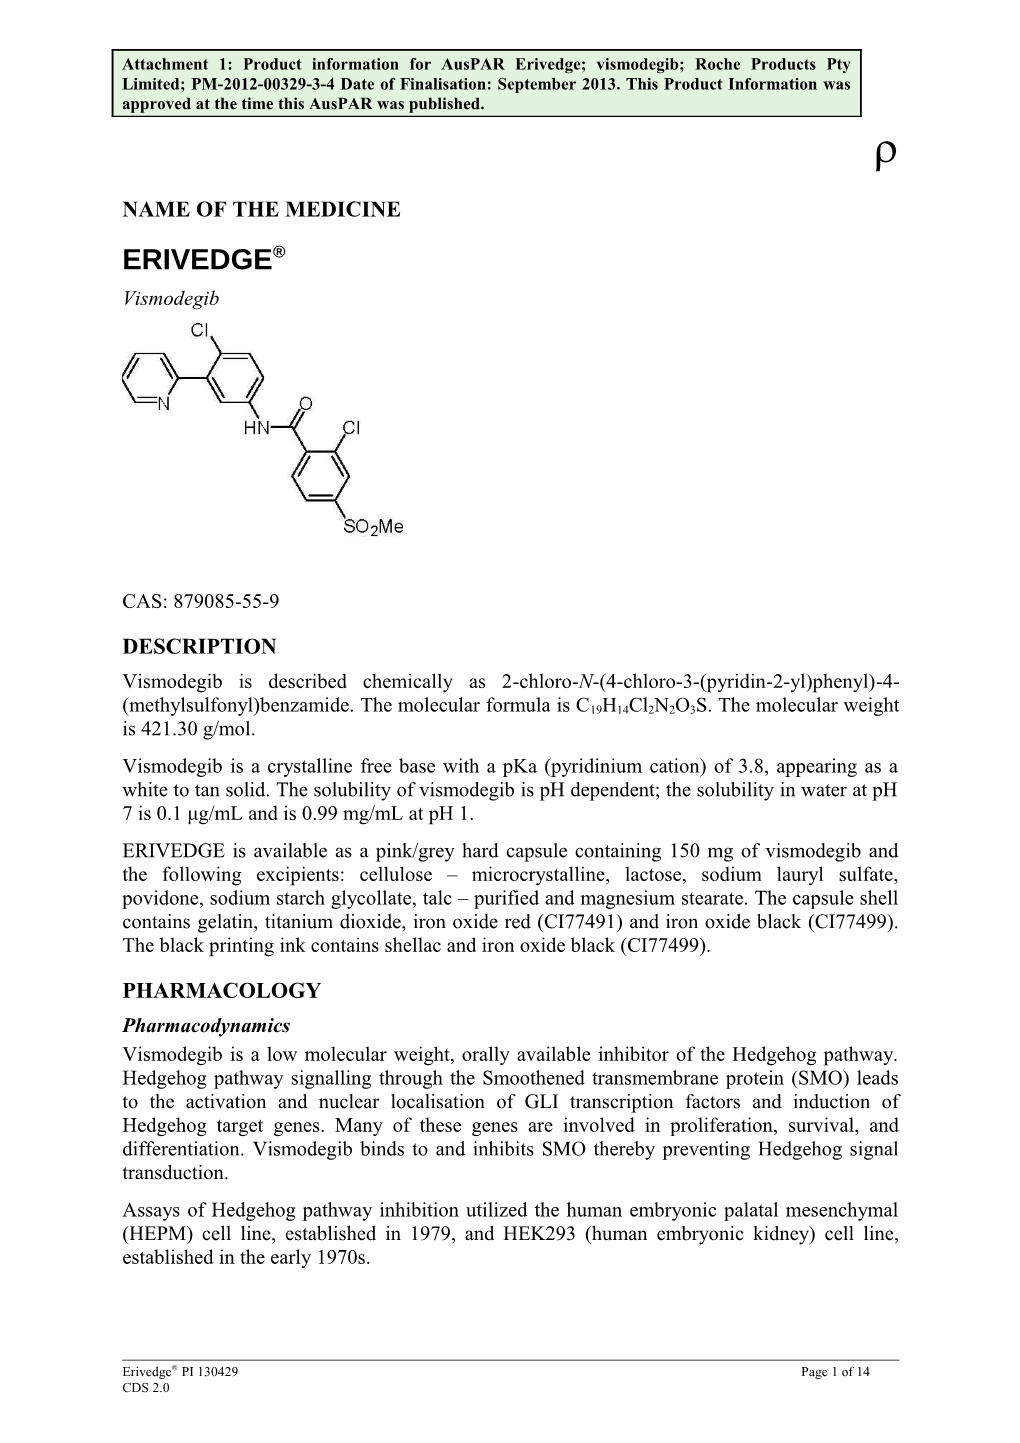 Attachment 1. Product Information for Erivedge